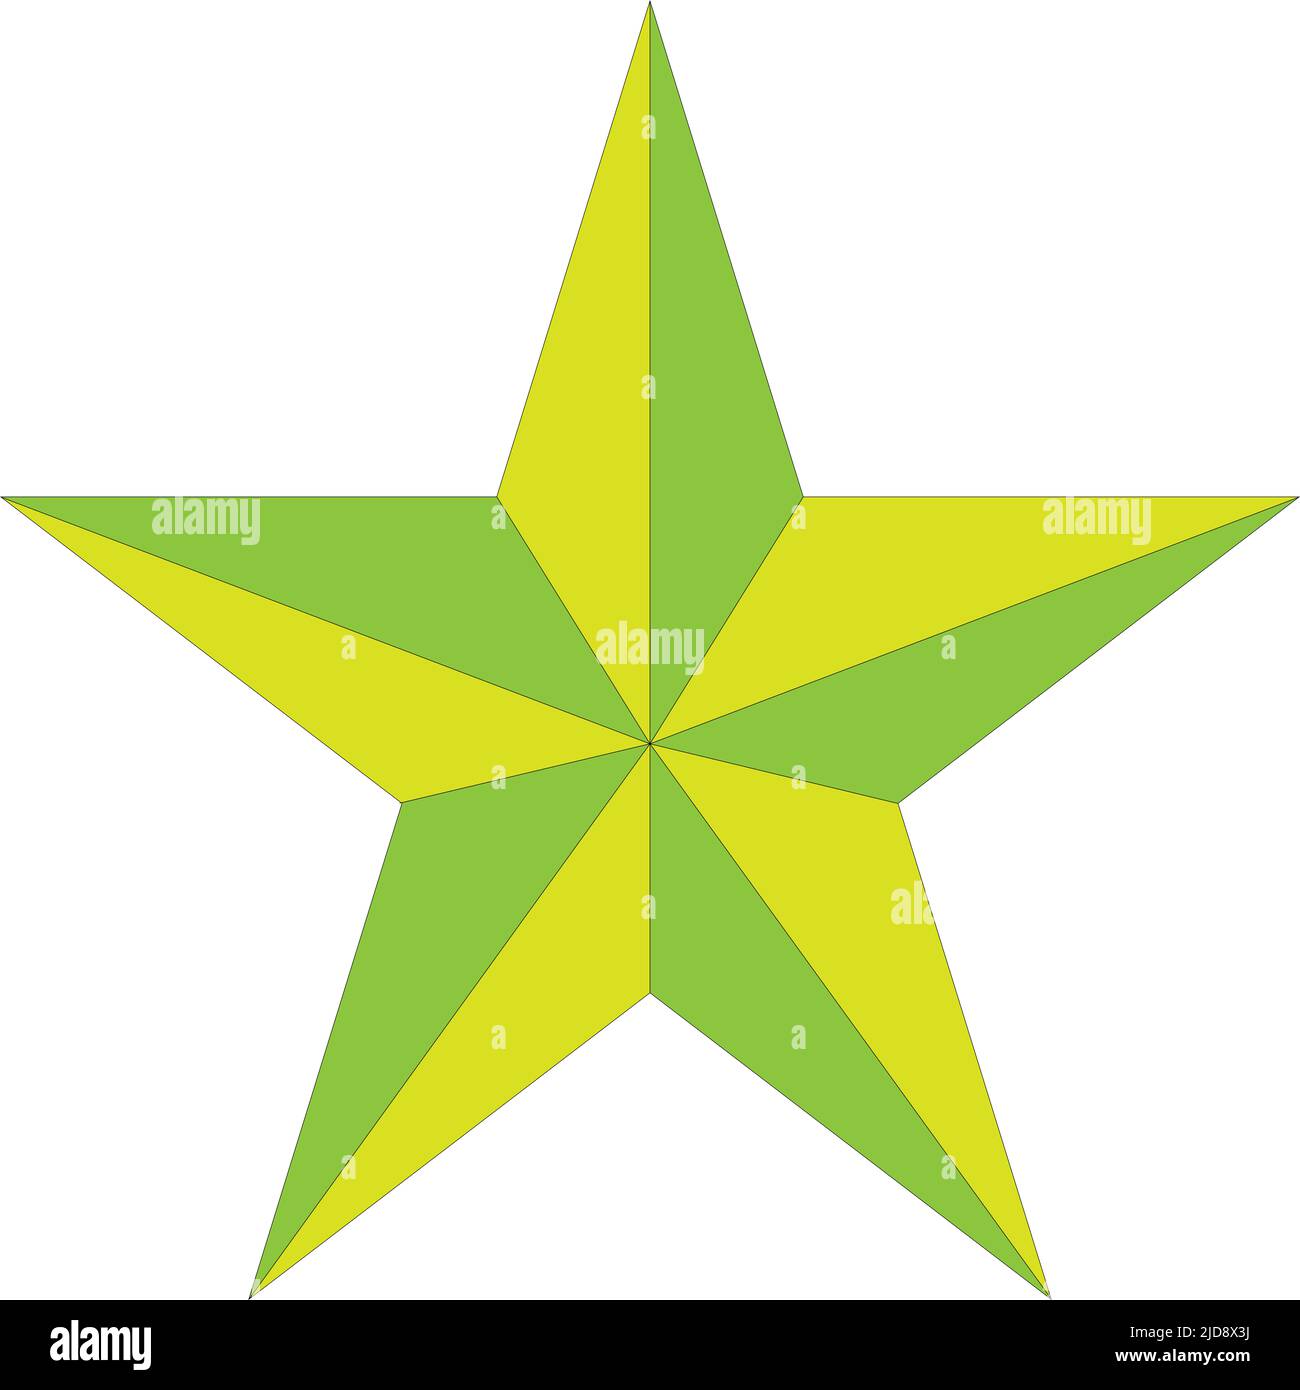 A graphic illustration of Star in Light Greens for use as an icon, logo or web decoration Stock Photo